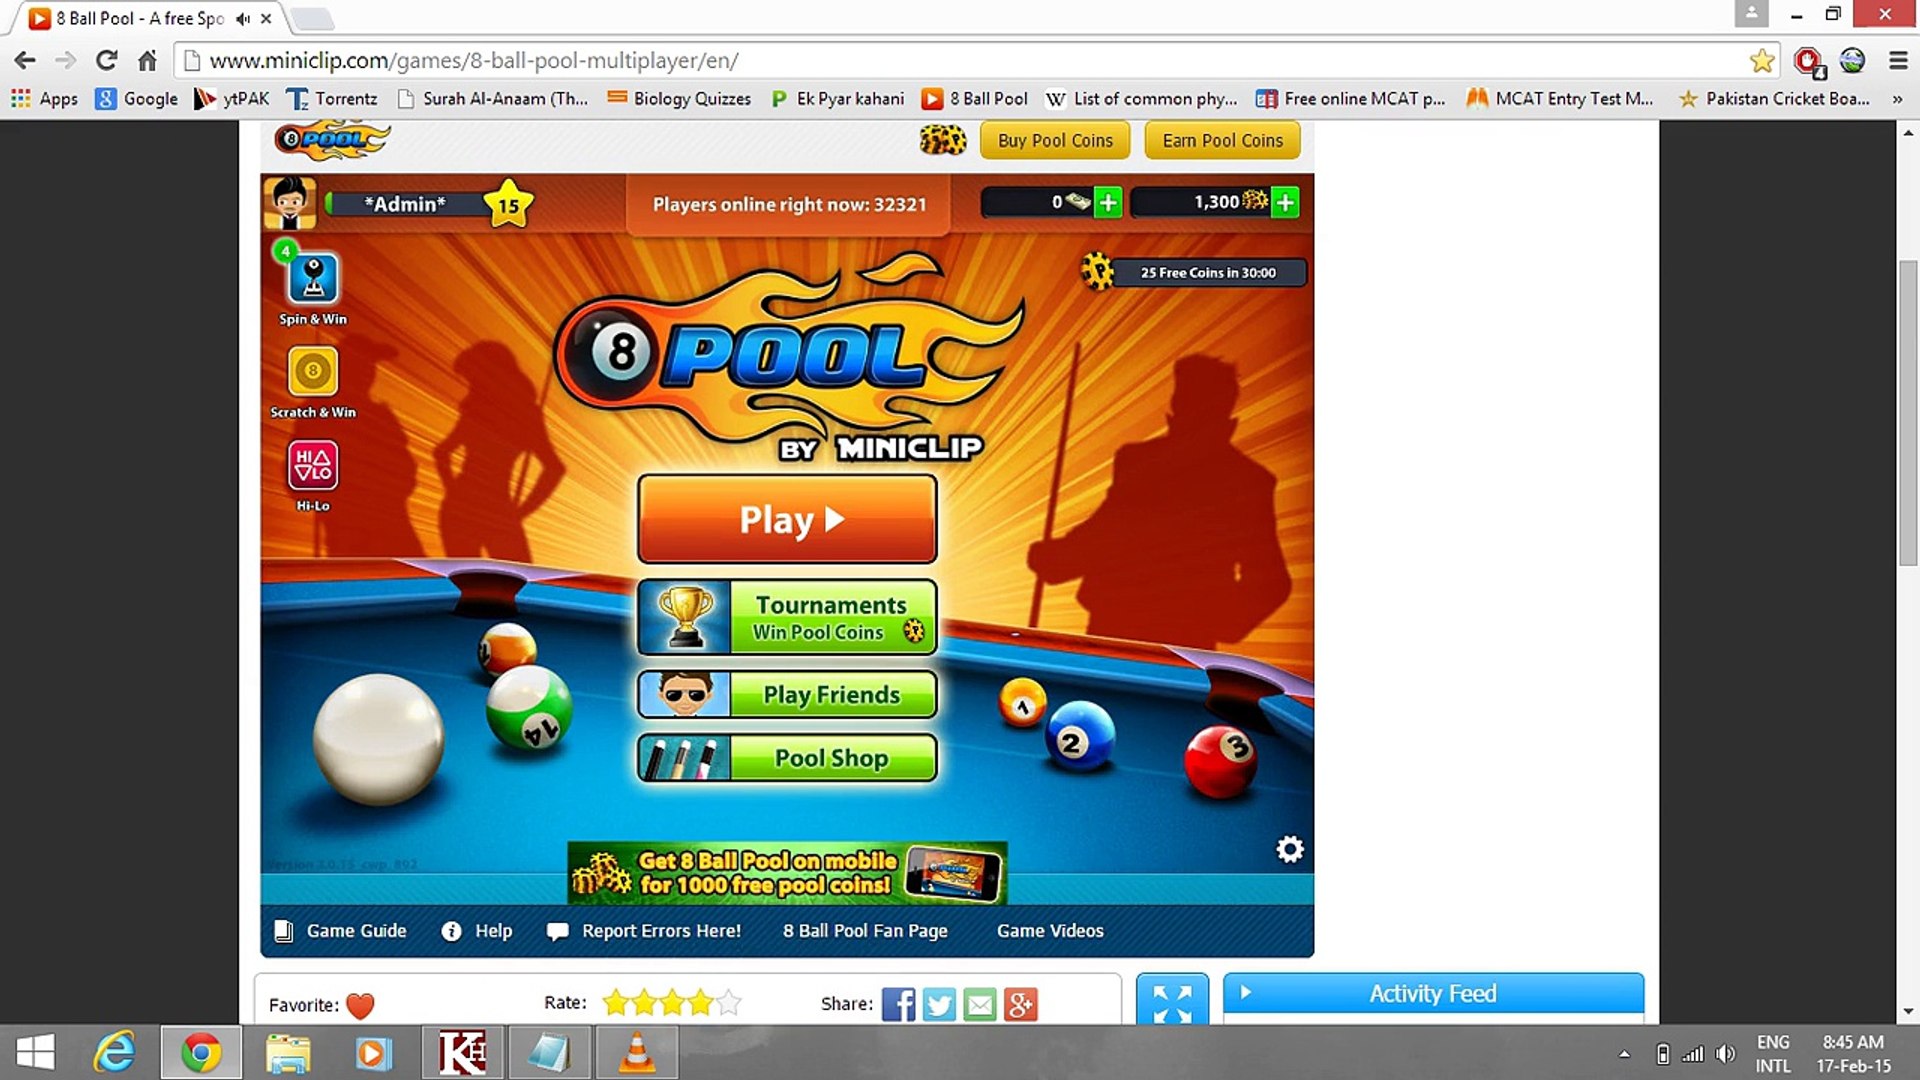 8 ball pool chrome extension hack